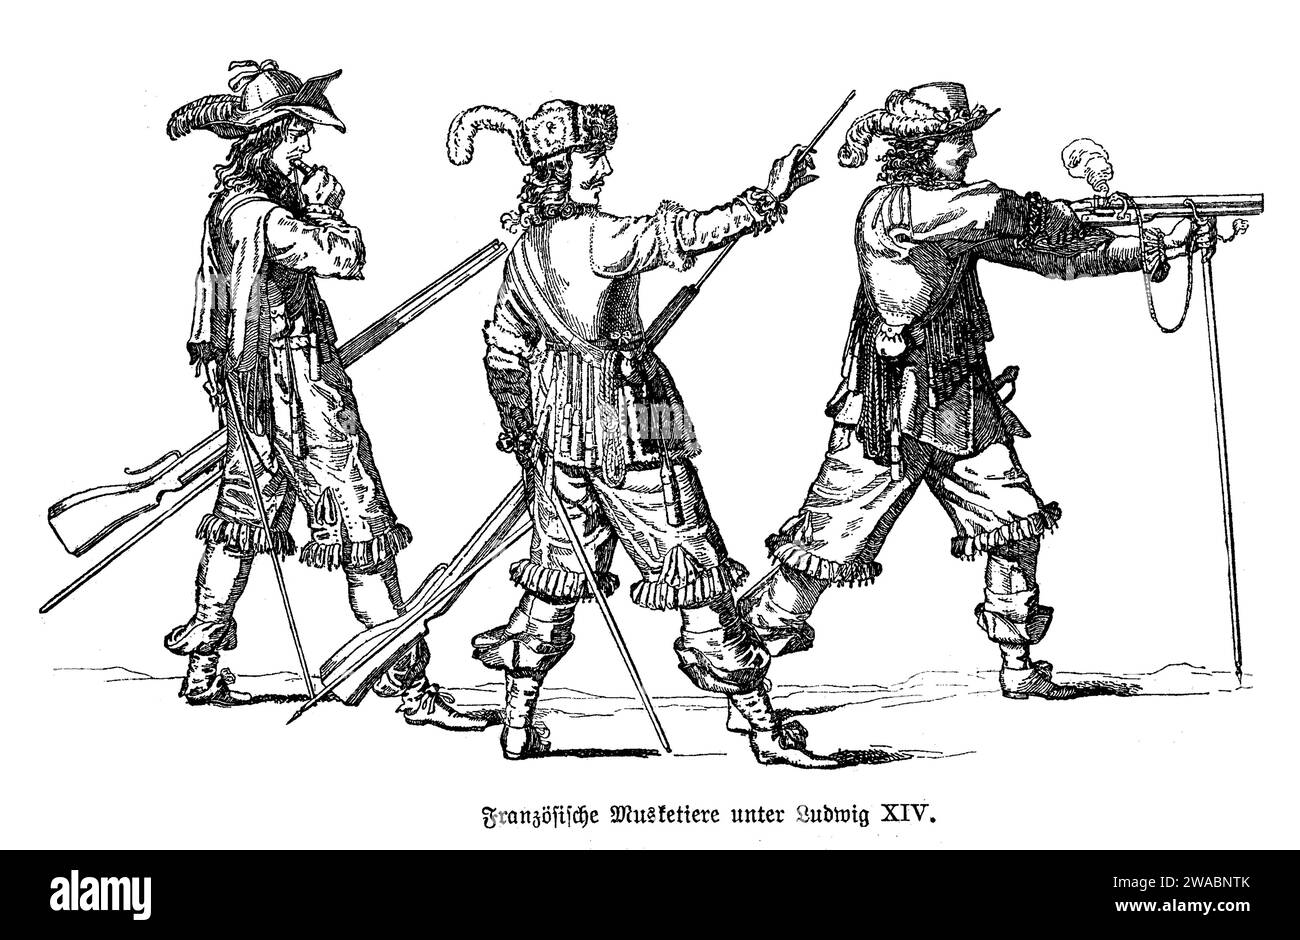 French musketeers  with feathered hat, sword and costume while firing a musket, king Louis XIV time (17th century) Stock Photo